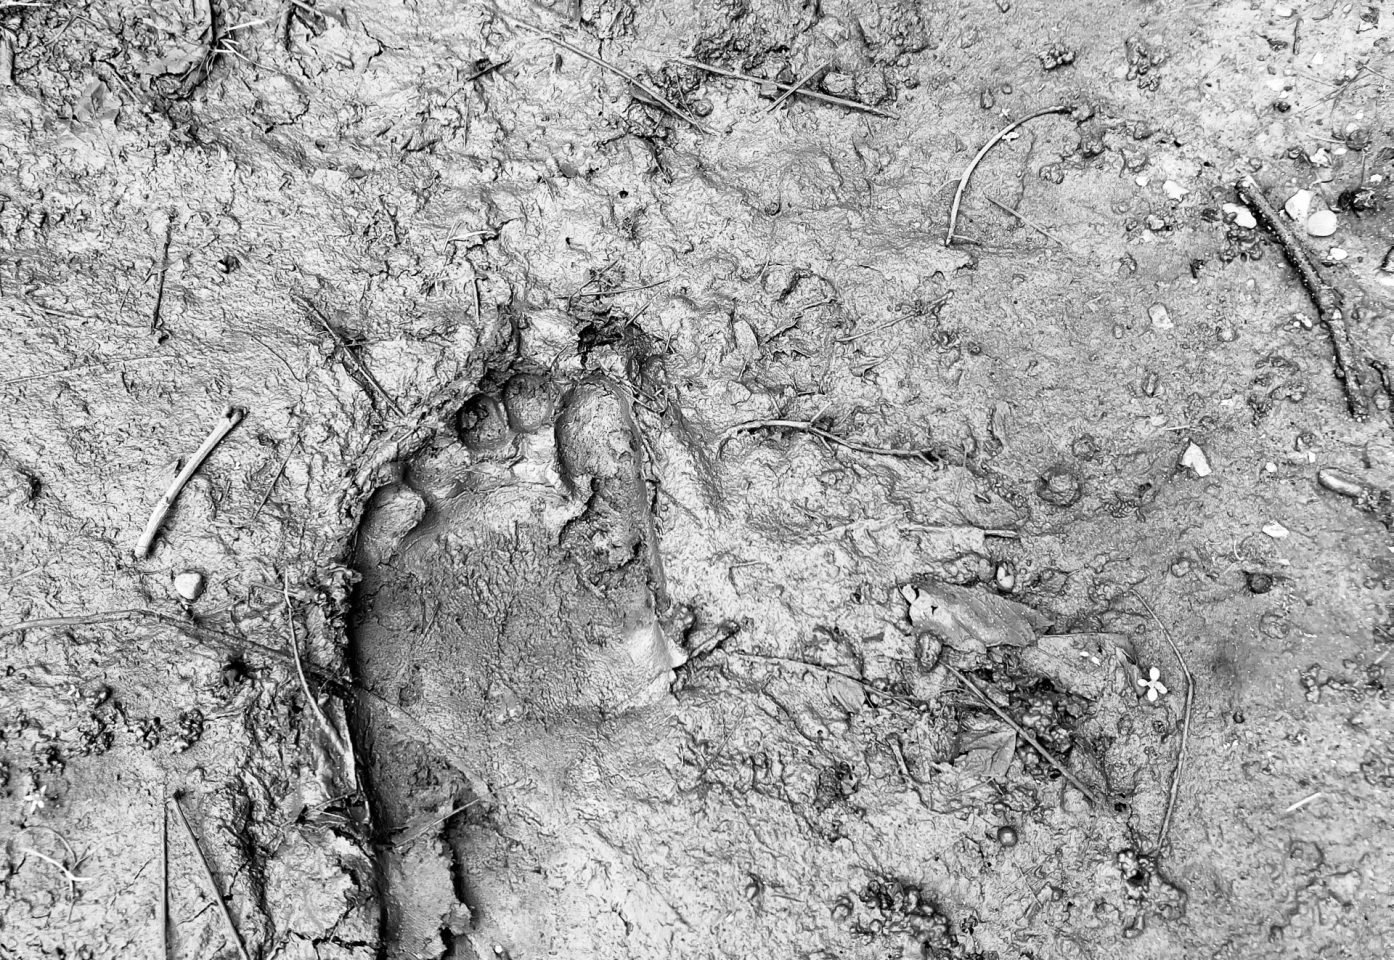 A black and white photo of a foot in mud